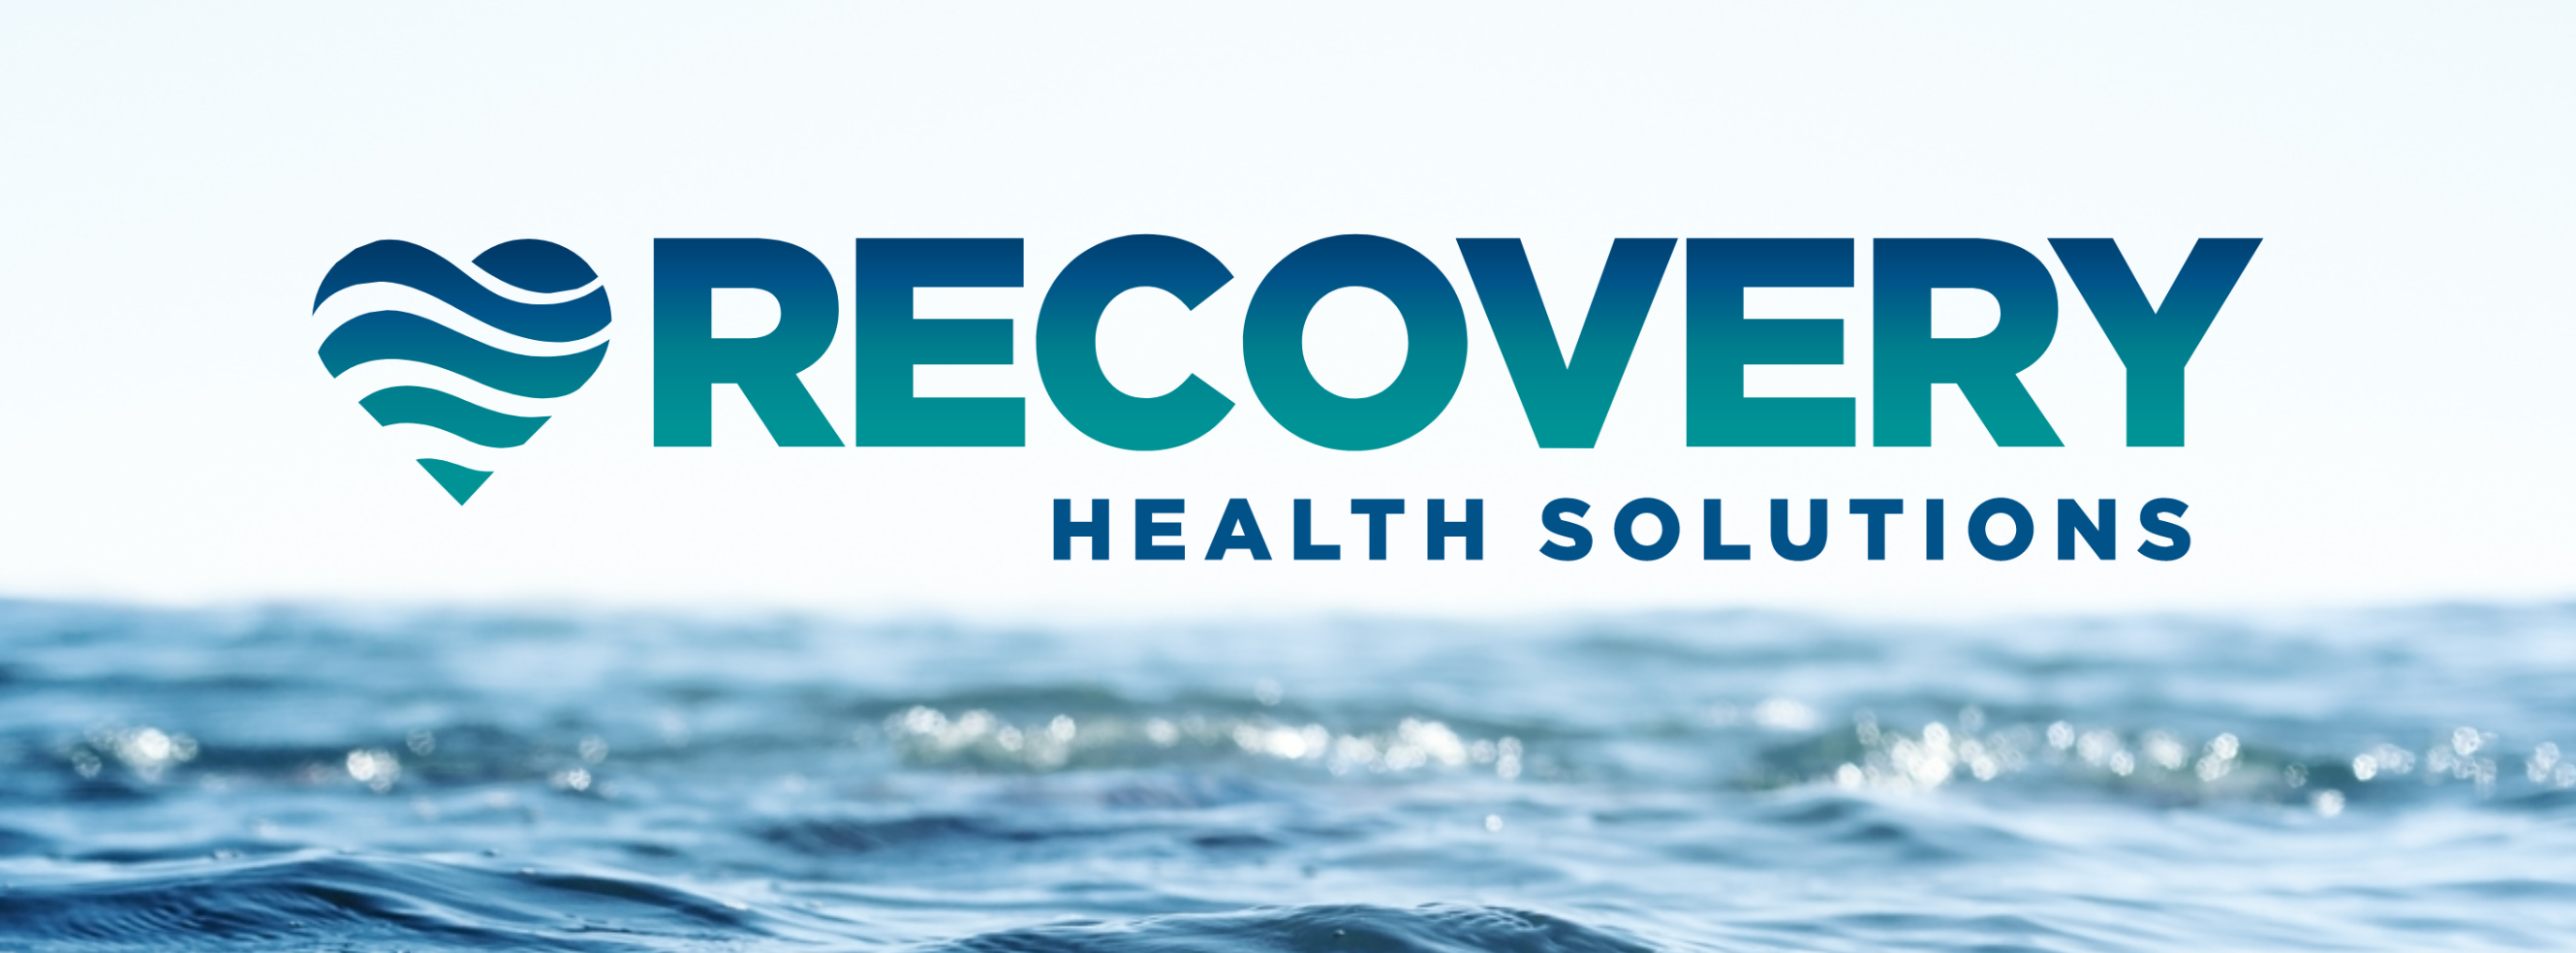 RECOVERY Health Solutions